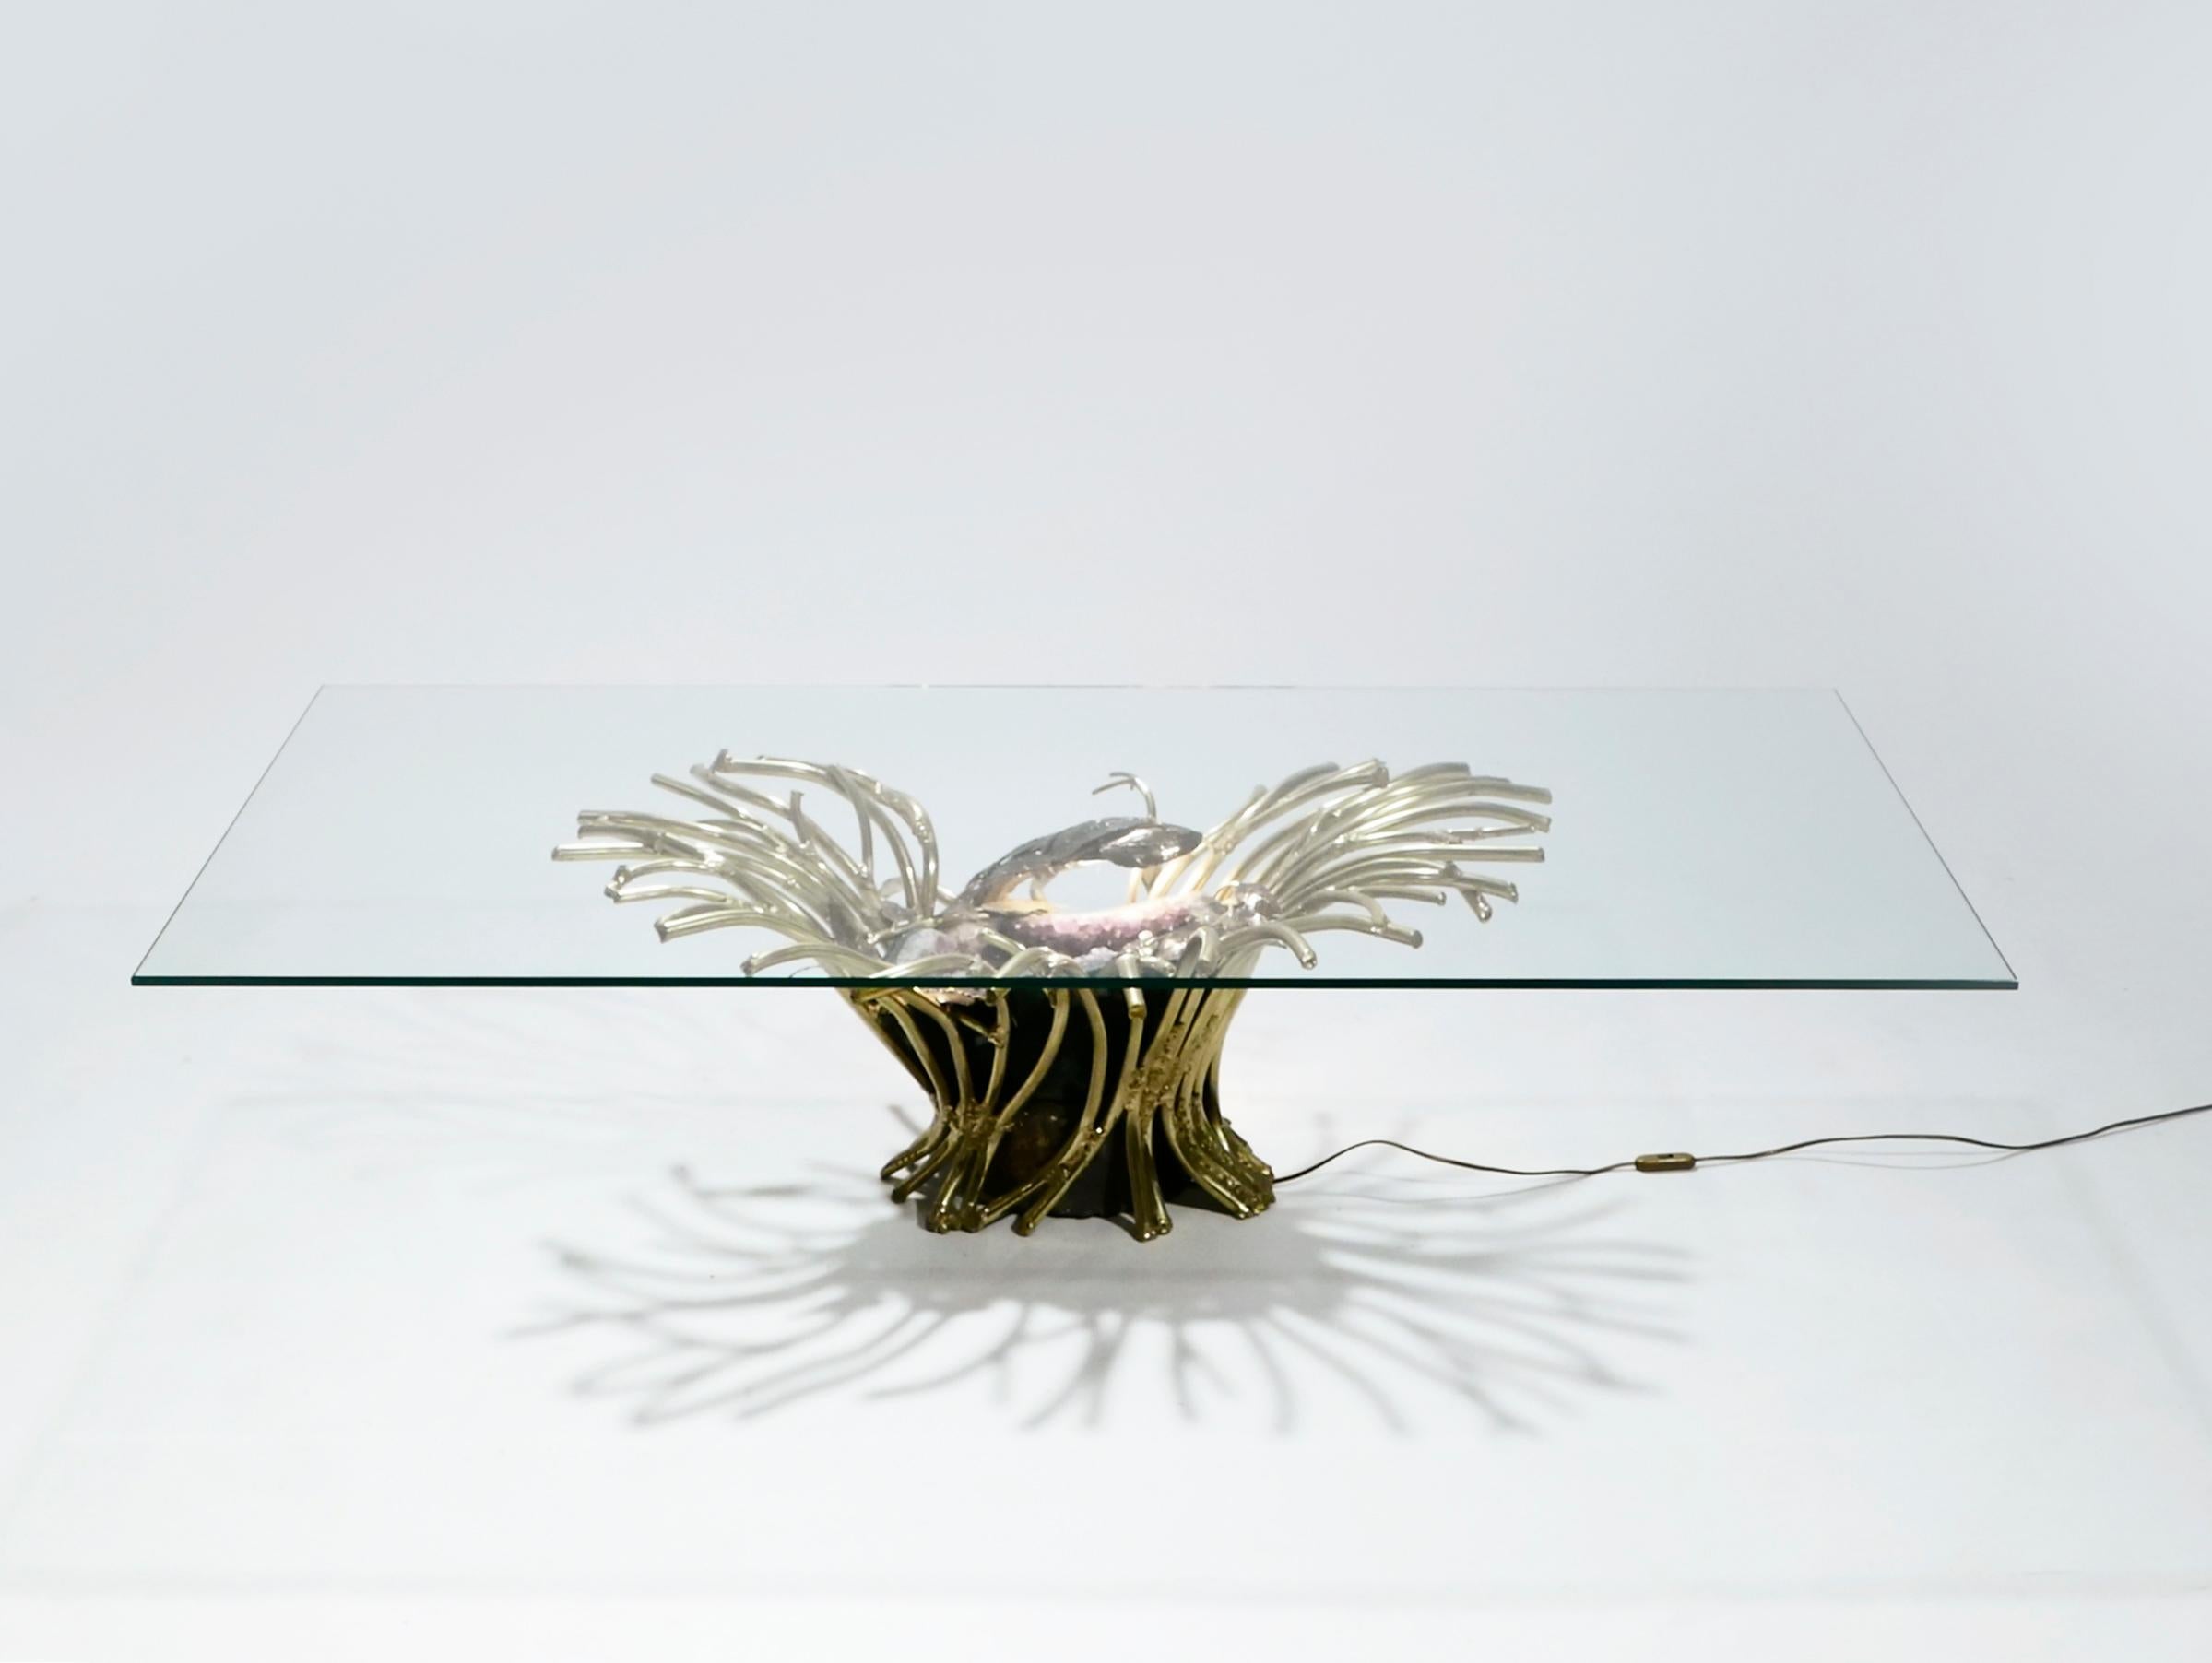 The creative design of this coffee table by Isabelle Faure is breathtaking. Tangled in a web of heavy brass “branches” is a monstrous amethyst geode, lit from the inside. This sculpture forms the base for a thick slab of transparent glass, a choice